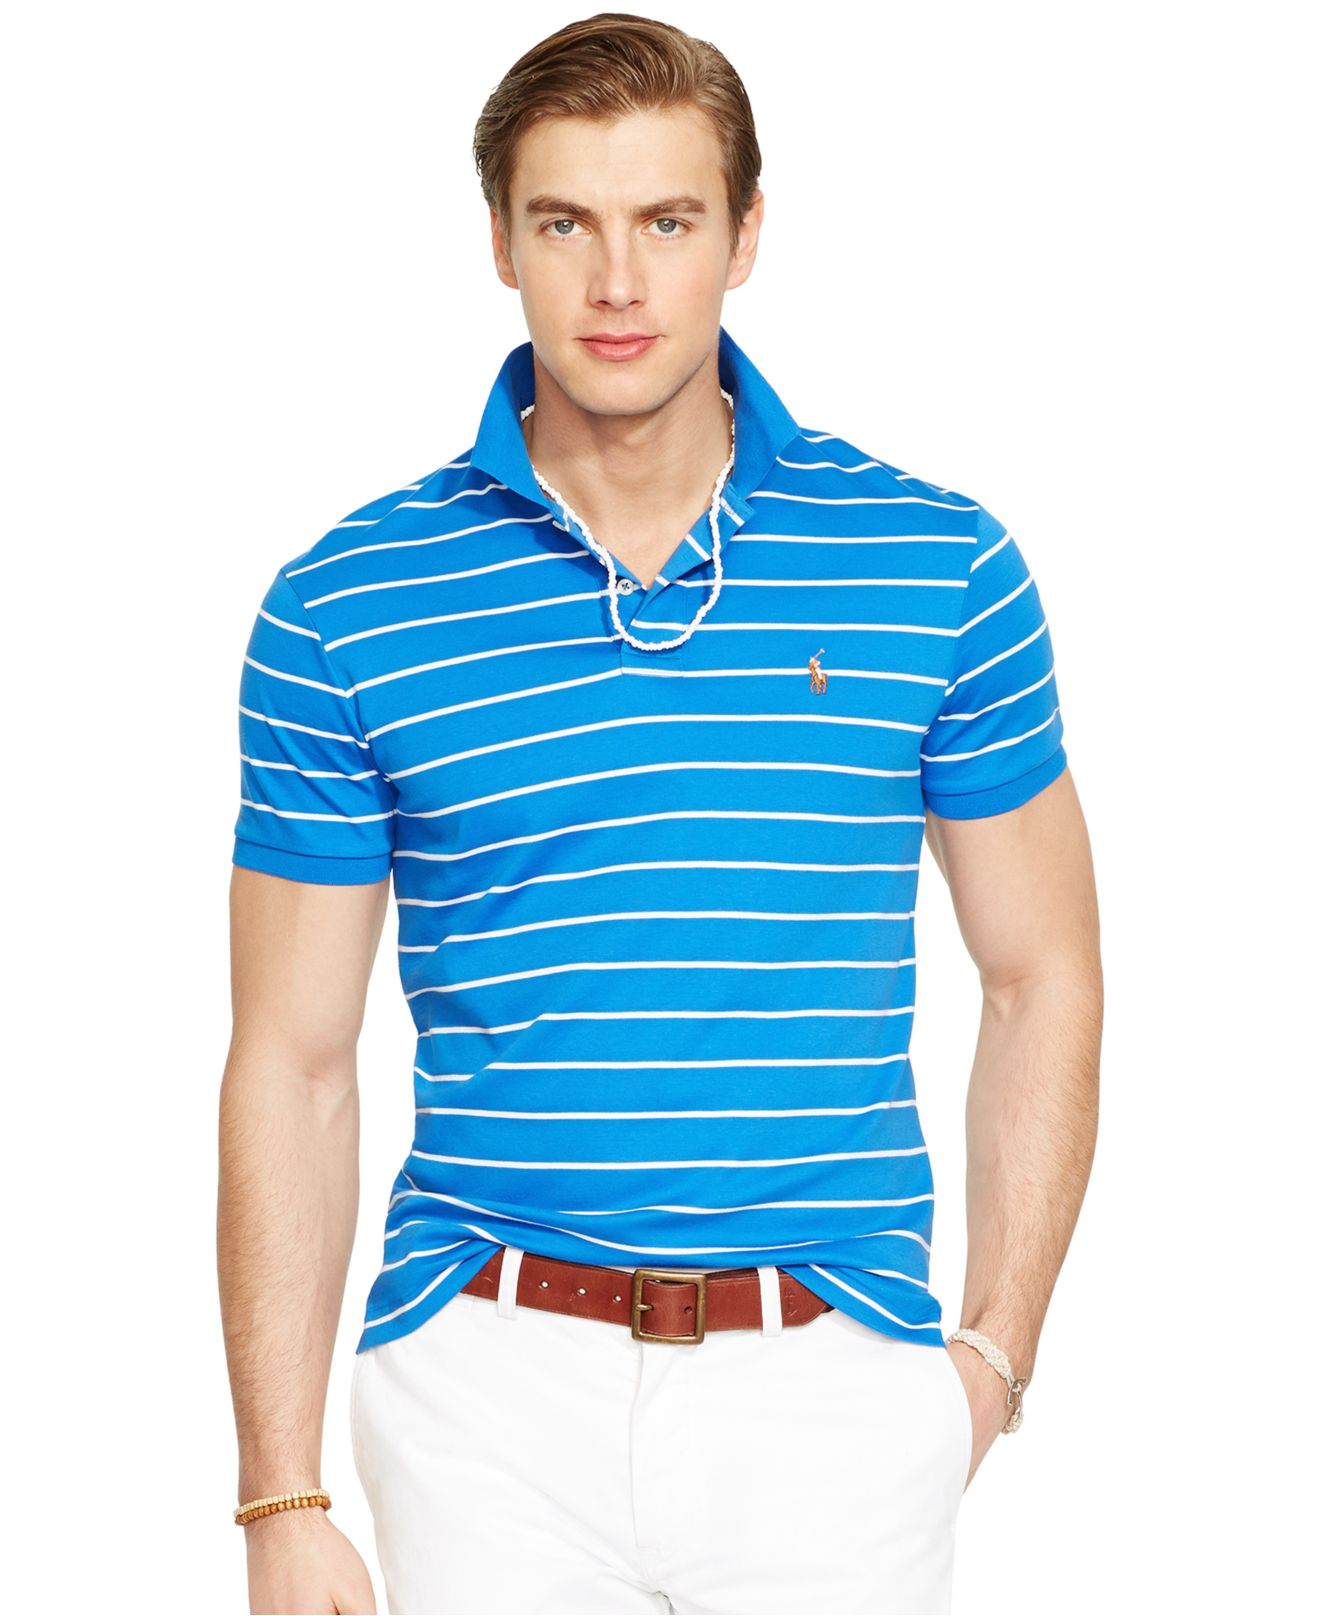 Lyst - Polo Ralph Lauren Striped Pima Soft-touch Polo Shirt for Men